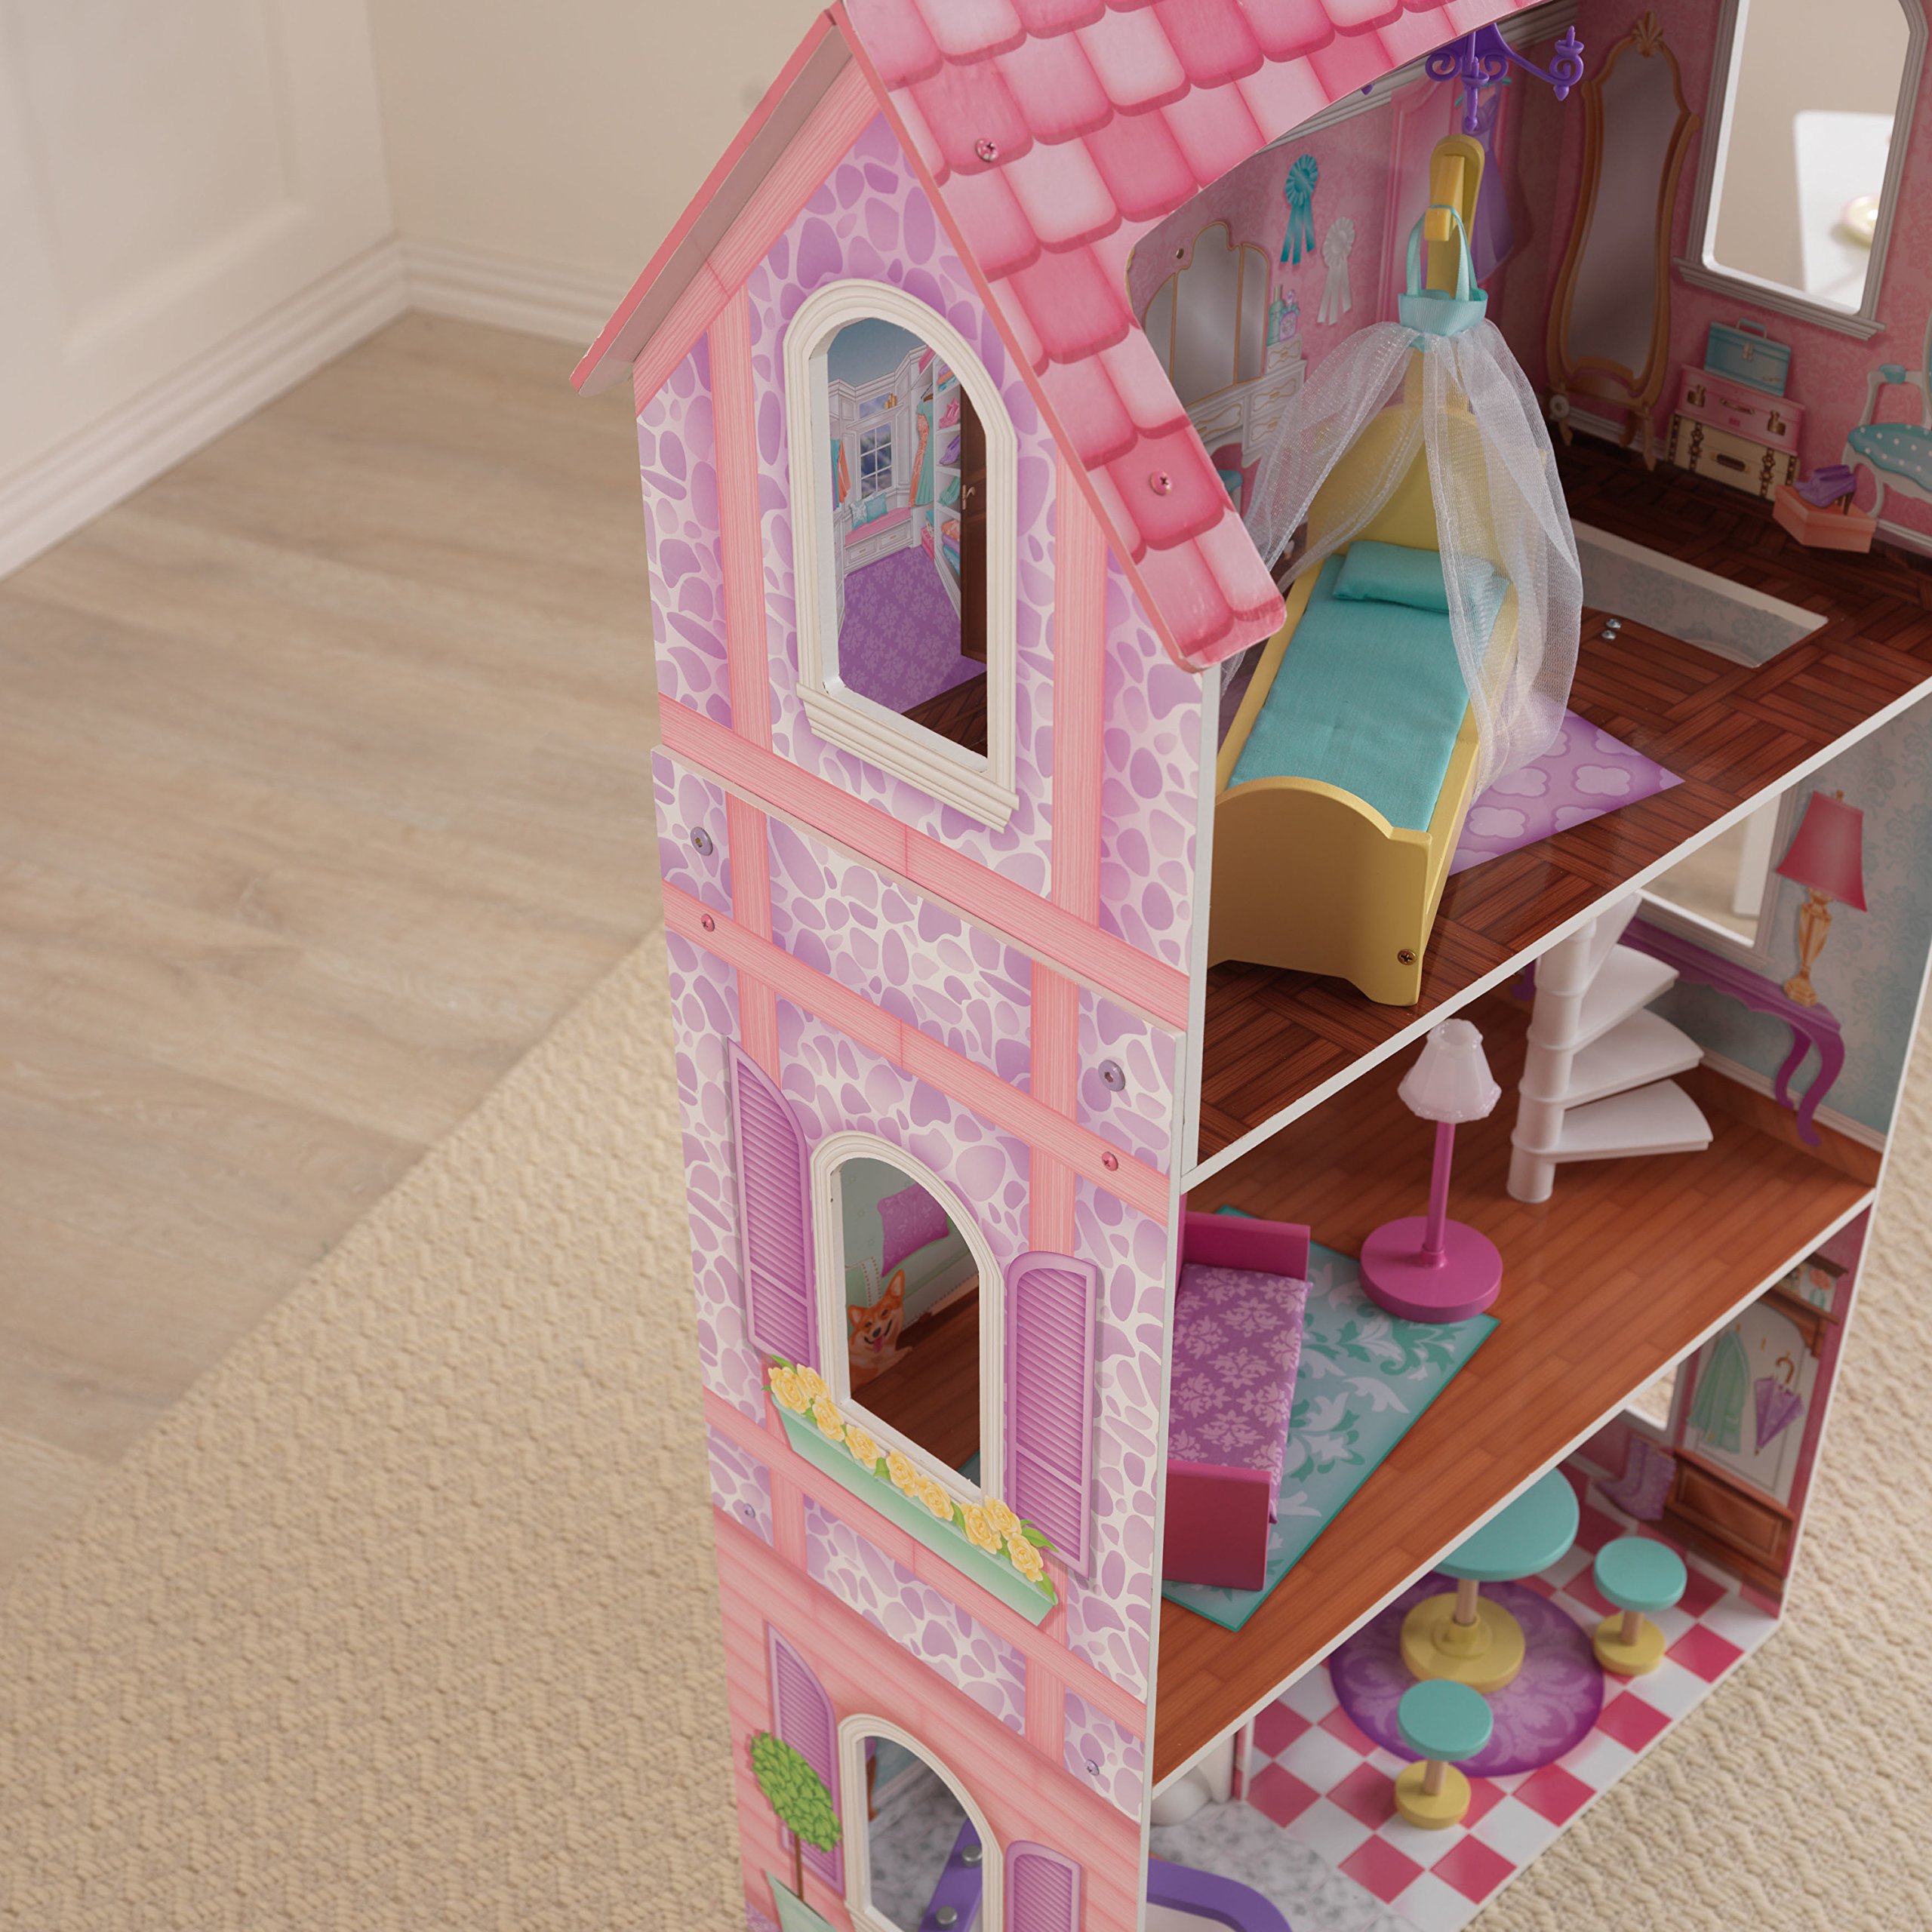 KidKraft Penelope Dollhouse with 9 Accessories Included, Gift for Ages 3+